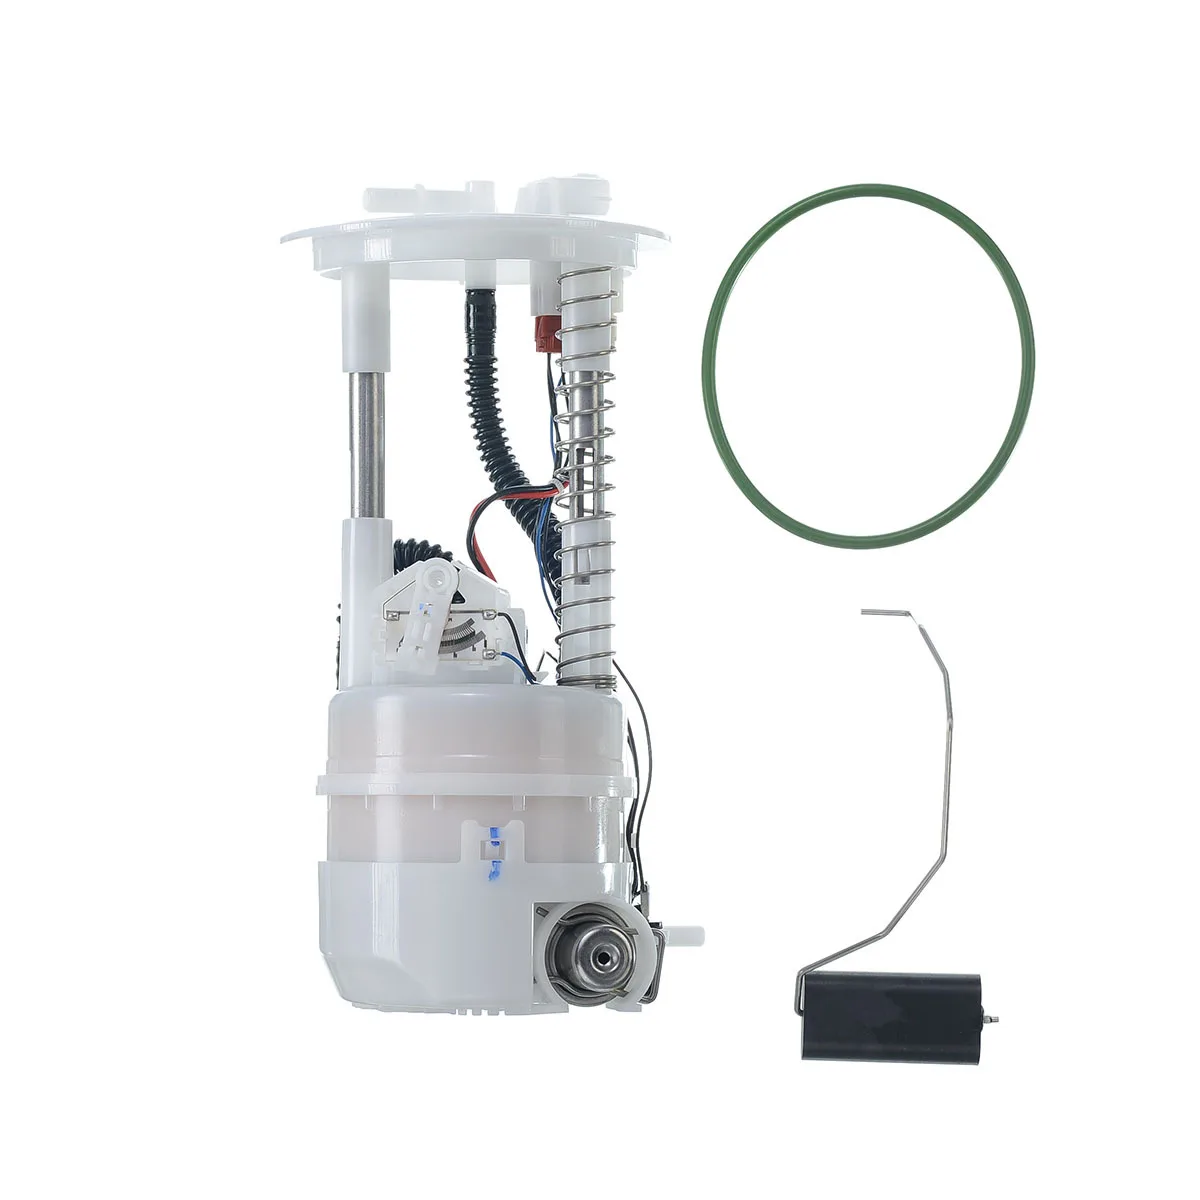 

In-stock CN US CA Fuel Pump Module withSending unit for Nissan Rogue Select l4 2.5L AWD E8856M FG1147